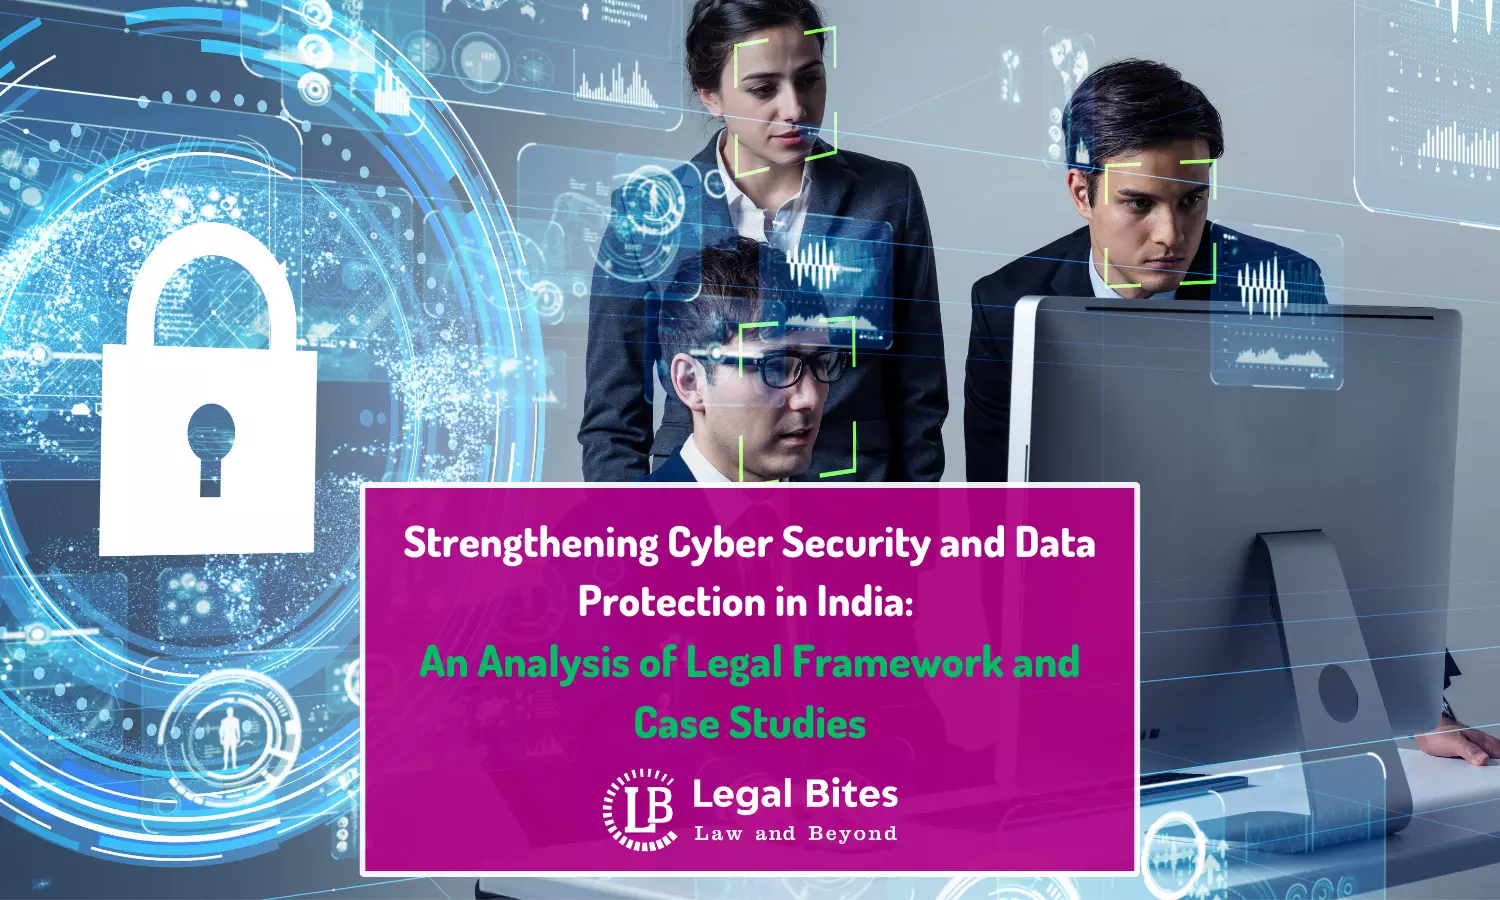 Strengthening Cyber Security and Data Protection in India: An Analysis of Legal Frameworks and Case Studies